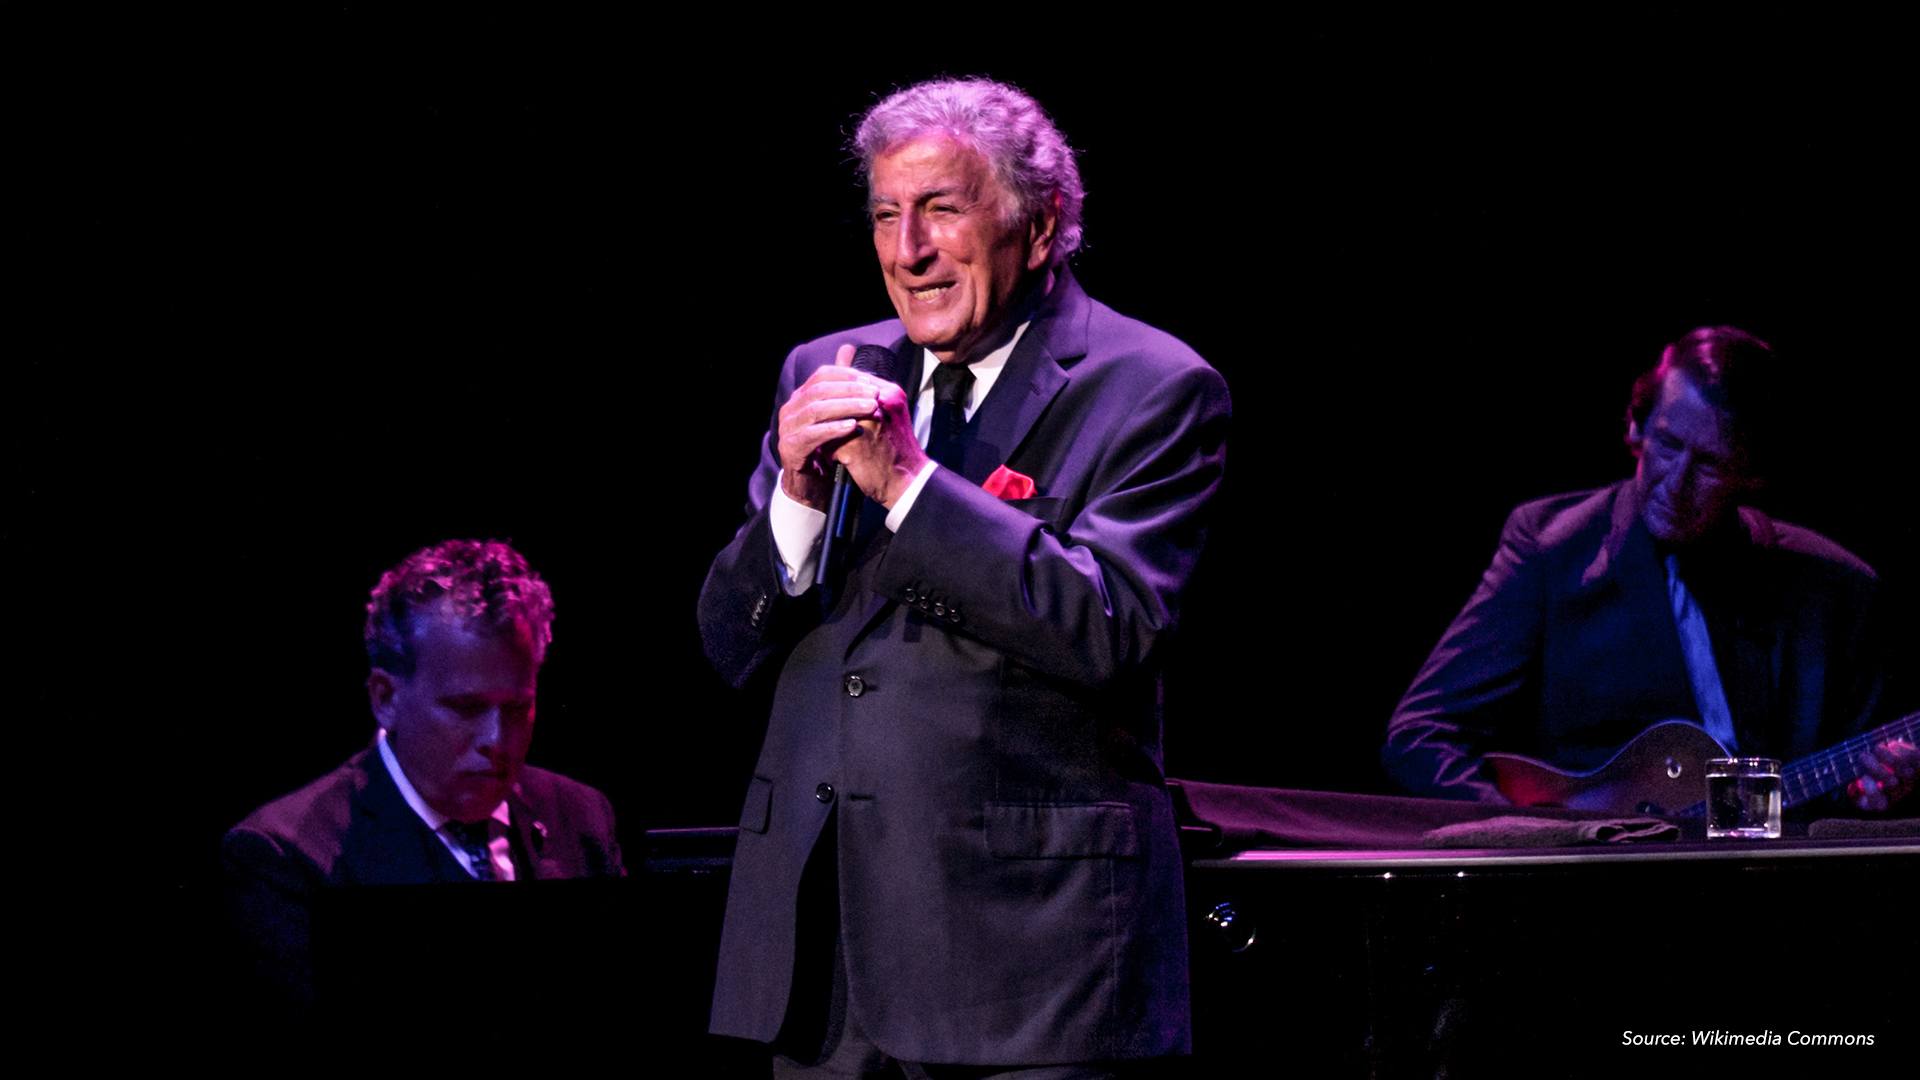 What We Can Learn About Alzheimer’s from Tony Bennett